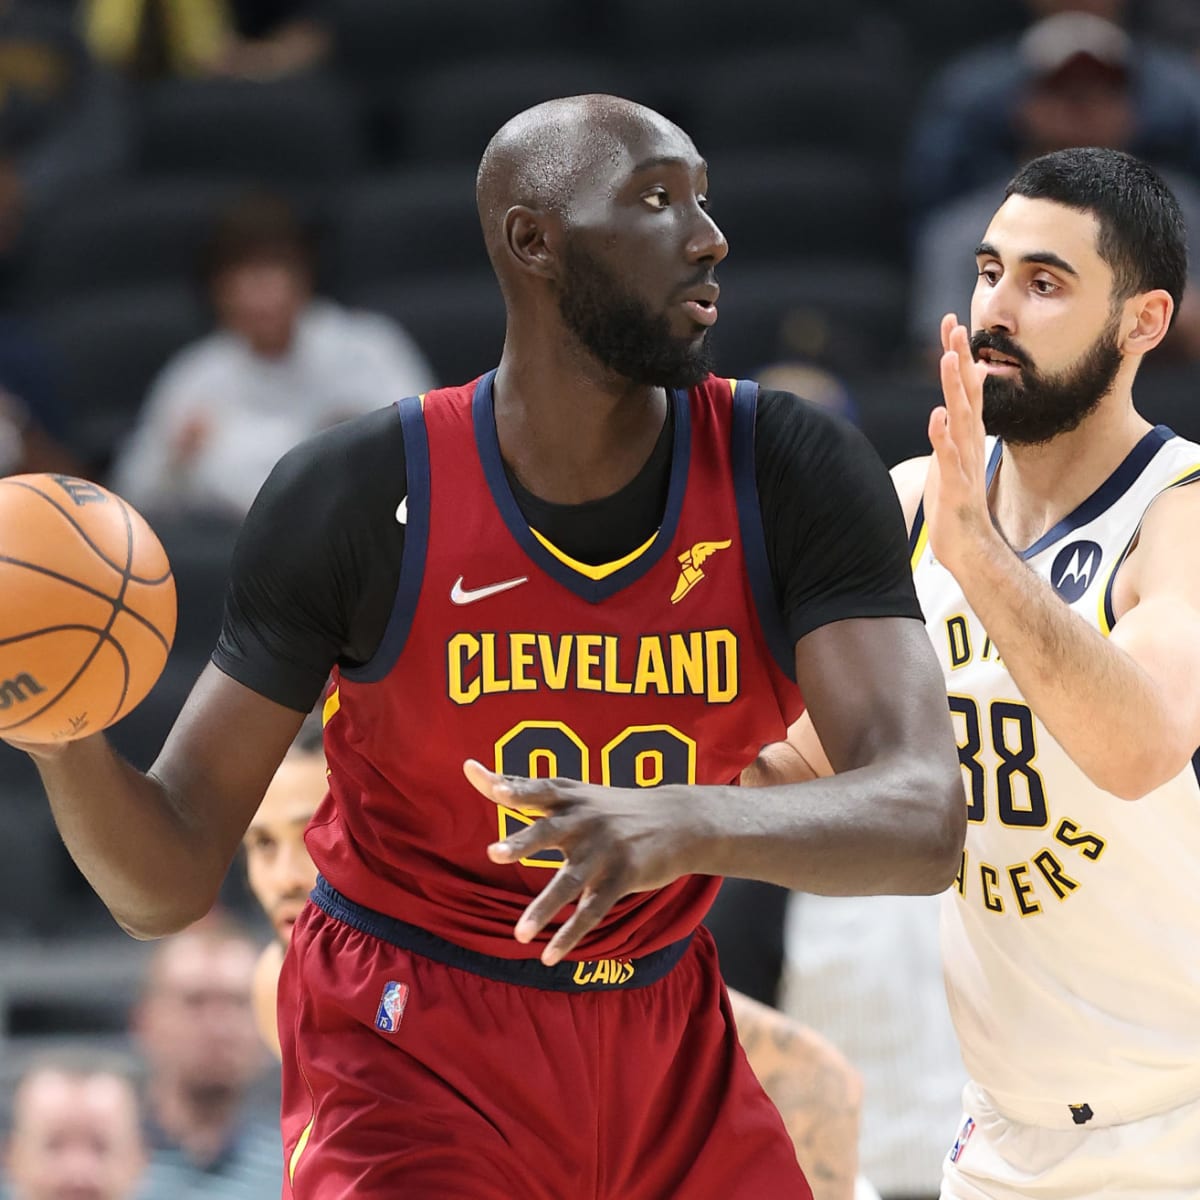 Cavs Nation on X: Tacko Fall brings his towering 7'5” frame to